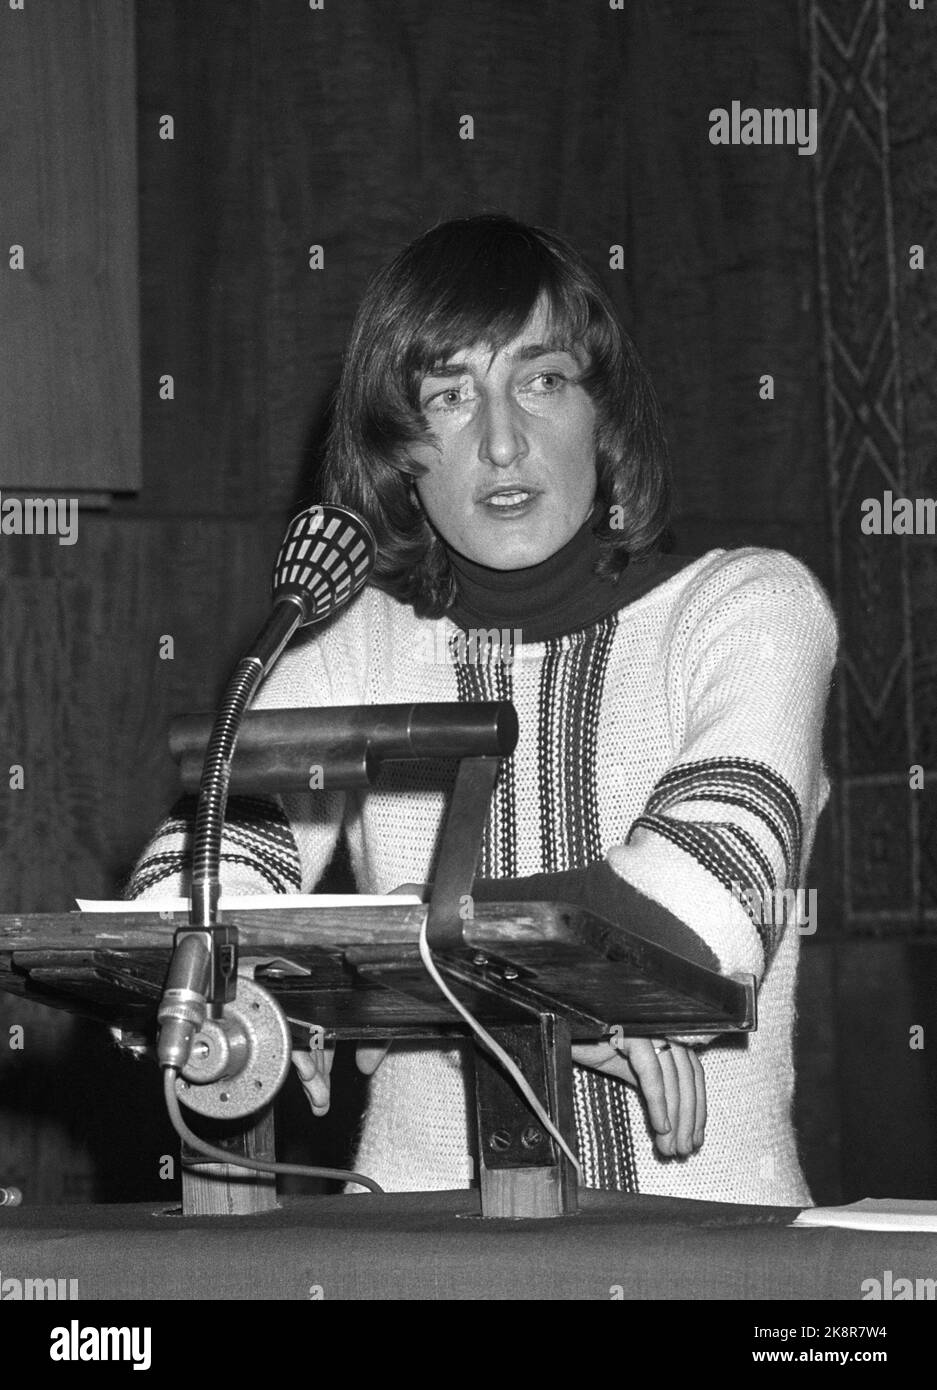 Oslo January 28, 1977. AUF chairman Sissel Rønbeck held the opening speech at AUF's national meeting in Oslo. Photo: Oddvar Walle Jensen NTB / NTB Stock Photo